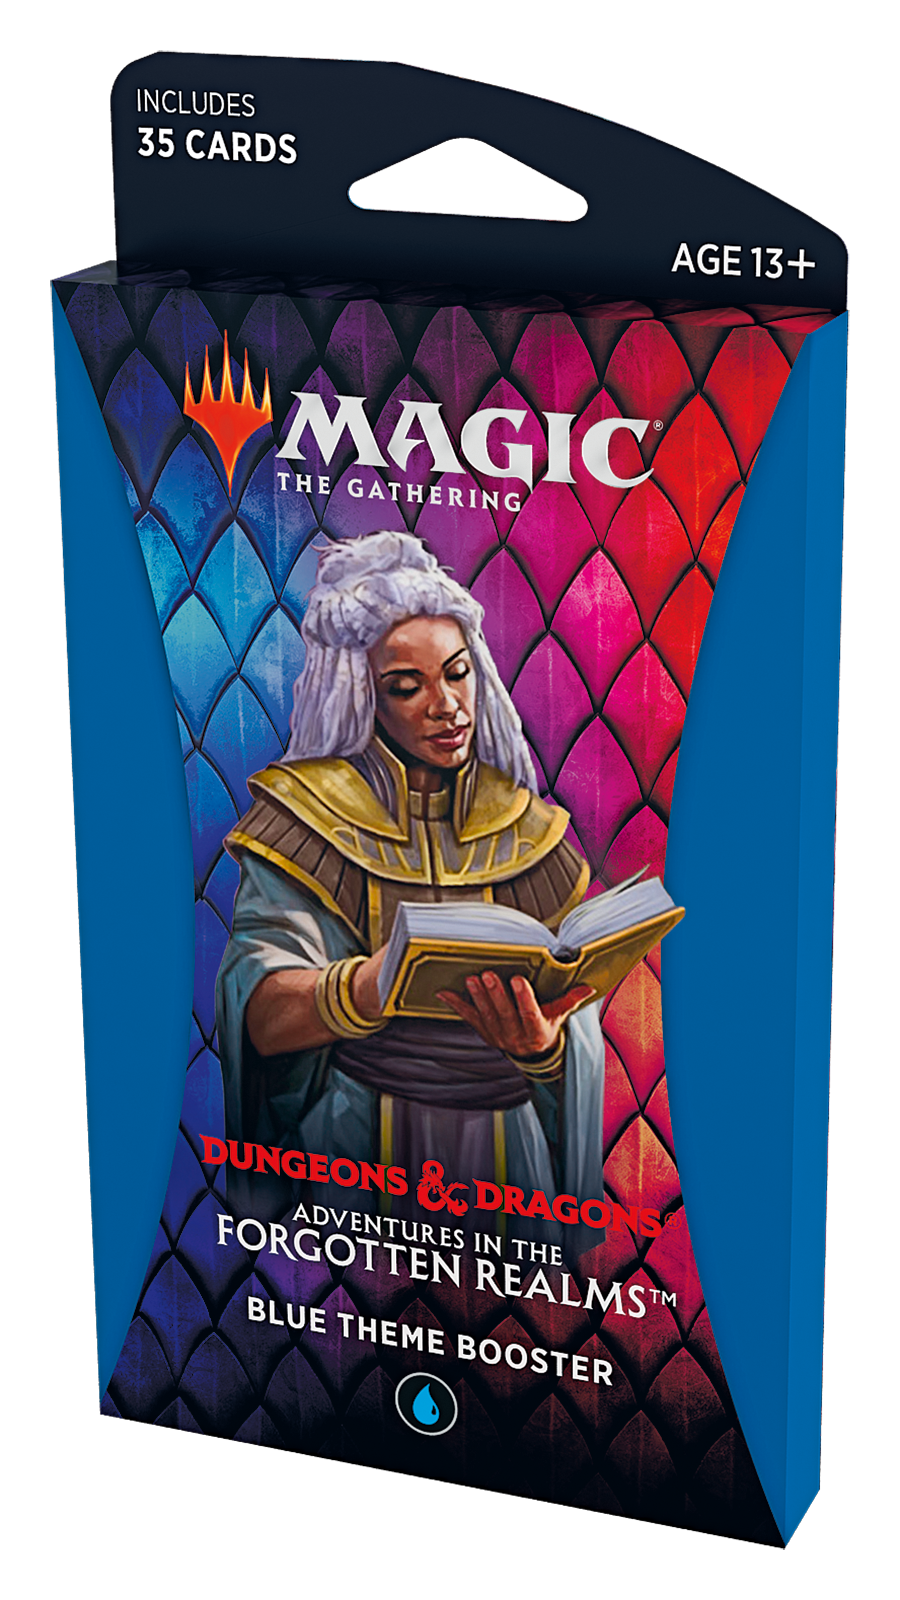 Magic: The Gathering – Adventures in the Forgotten Realms - Theme Booster Pack